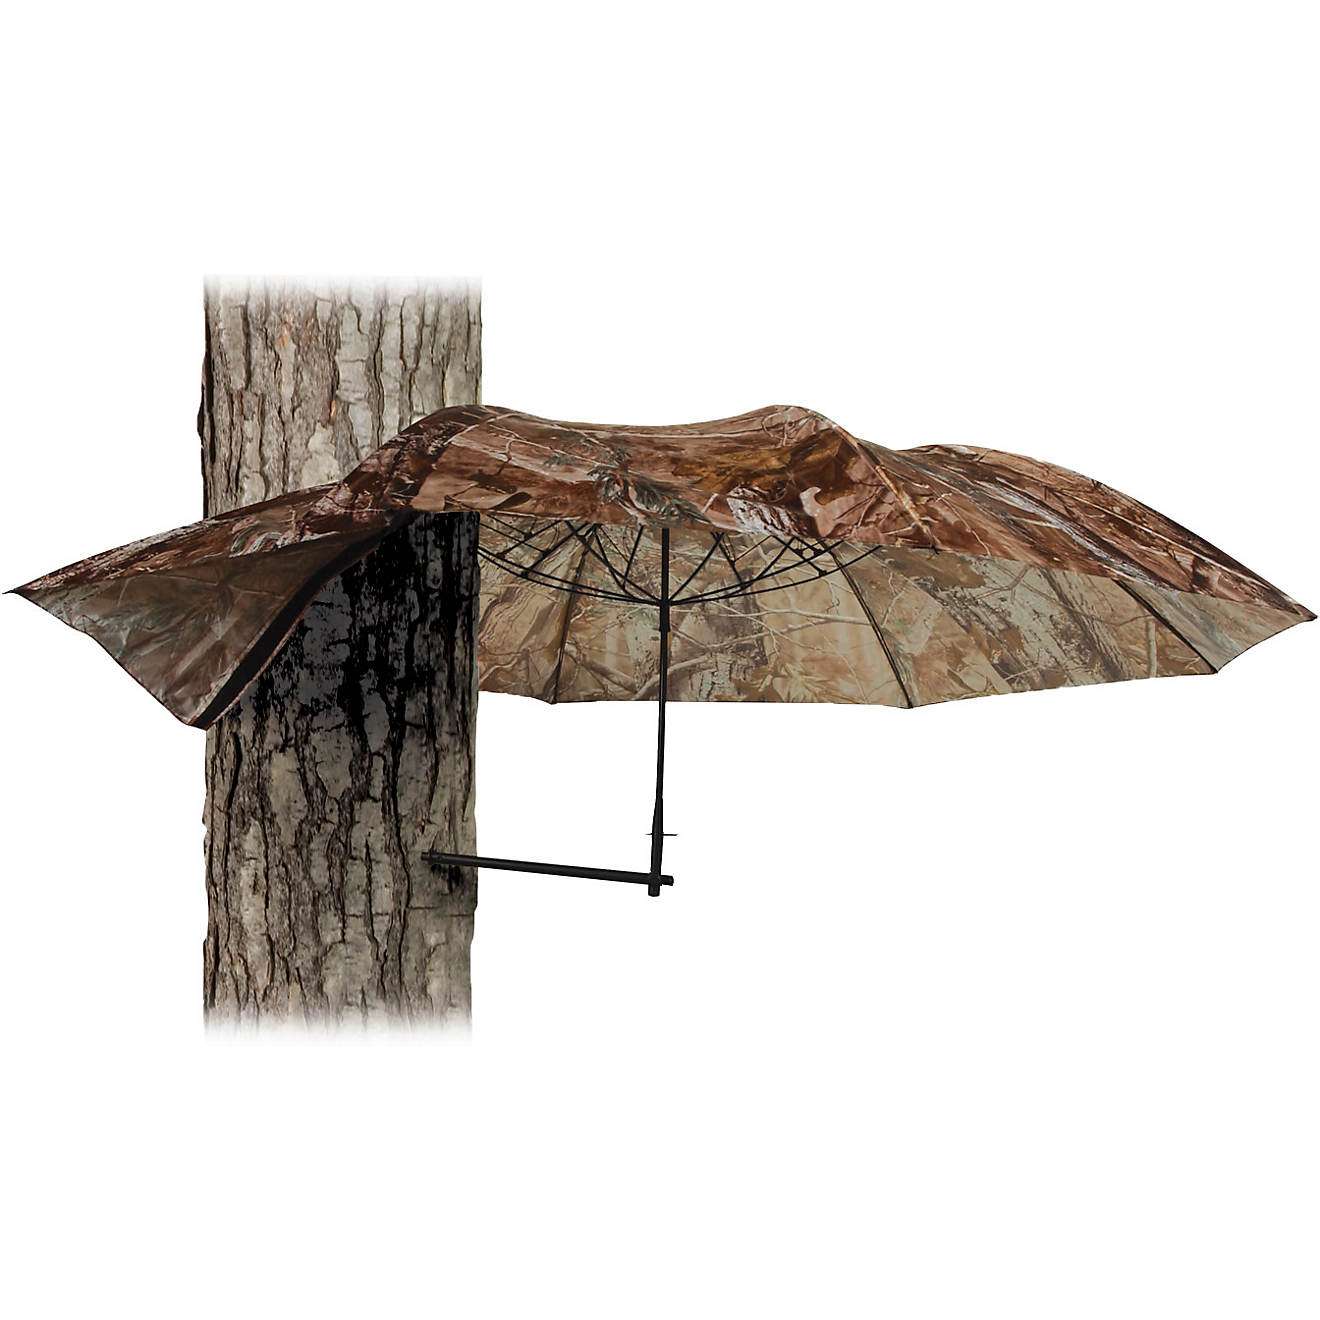 <p><strong>Ameristep 54-inch Realtree Xtra Hunter's Treestand Umbrella</strong><br> Early on in the hunting season, the threat of rain ruining your hunting plans is high. A treestand umbrella is an underrated product that hunters need to keep in mind this season. <a href=